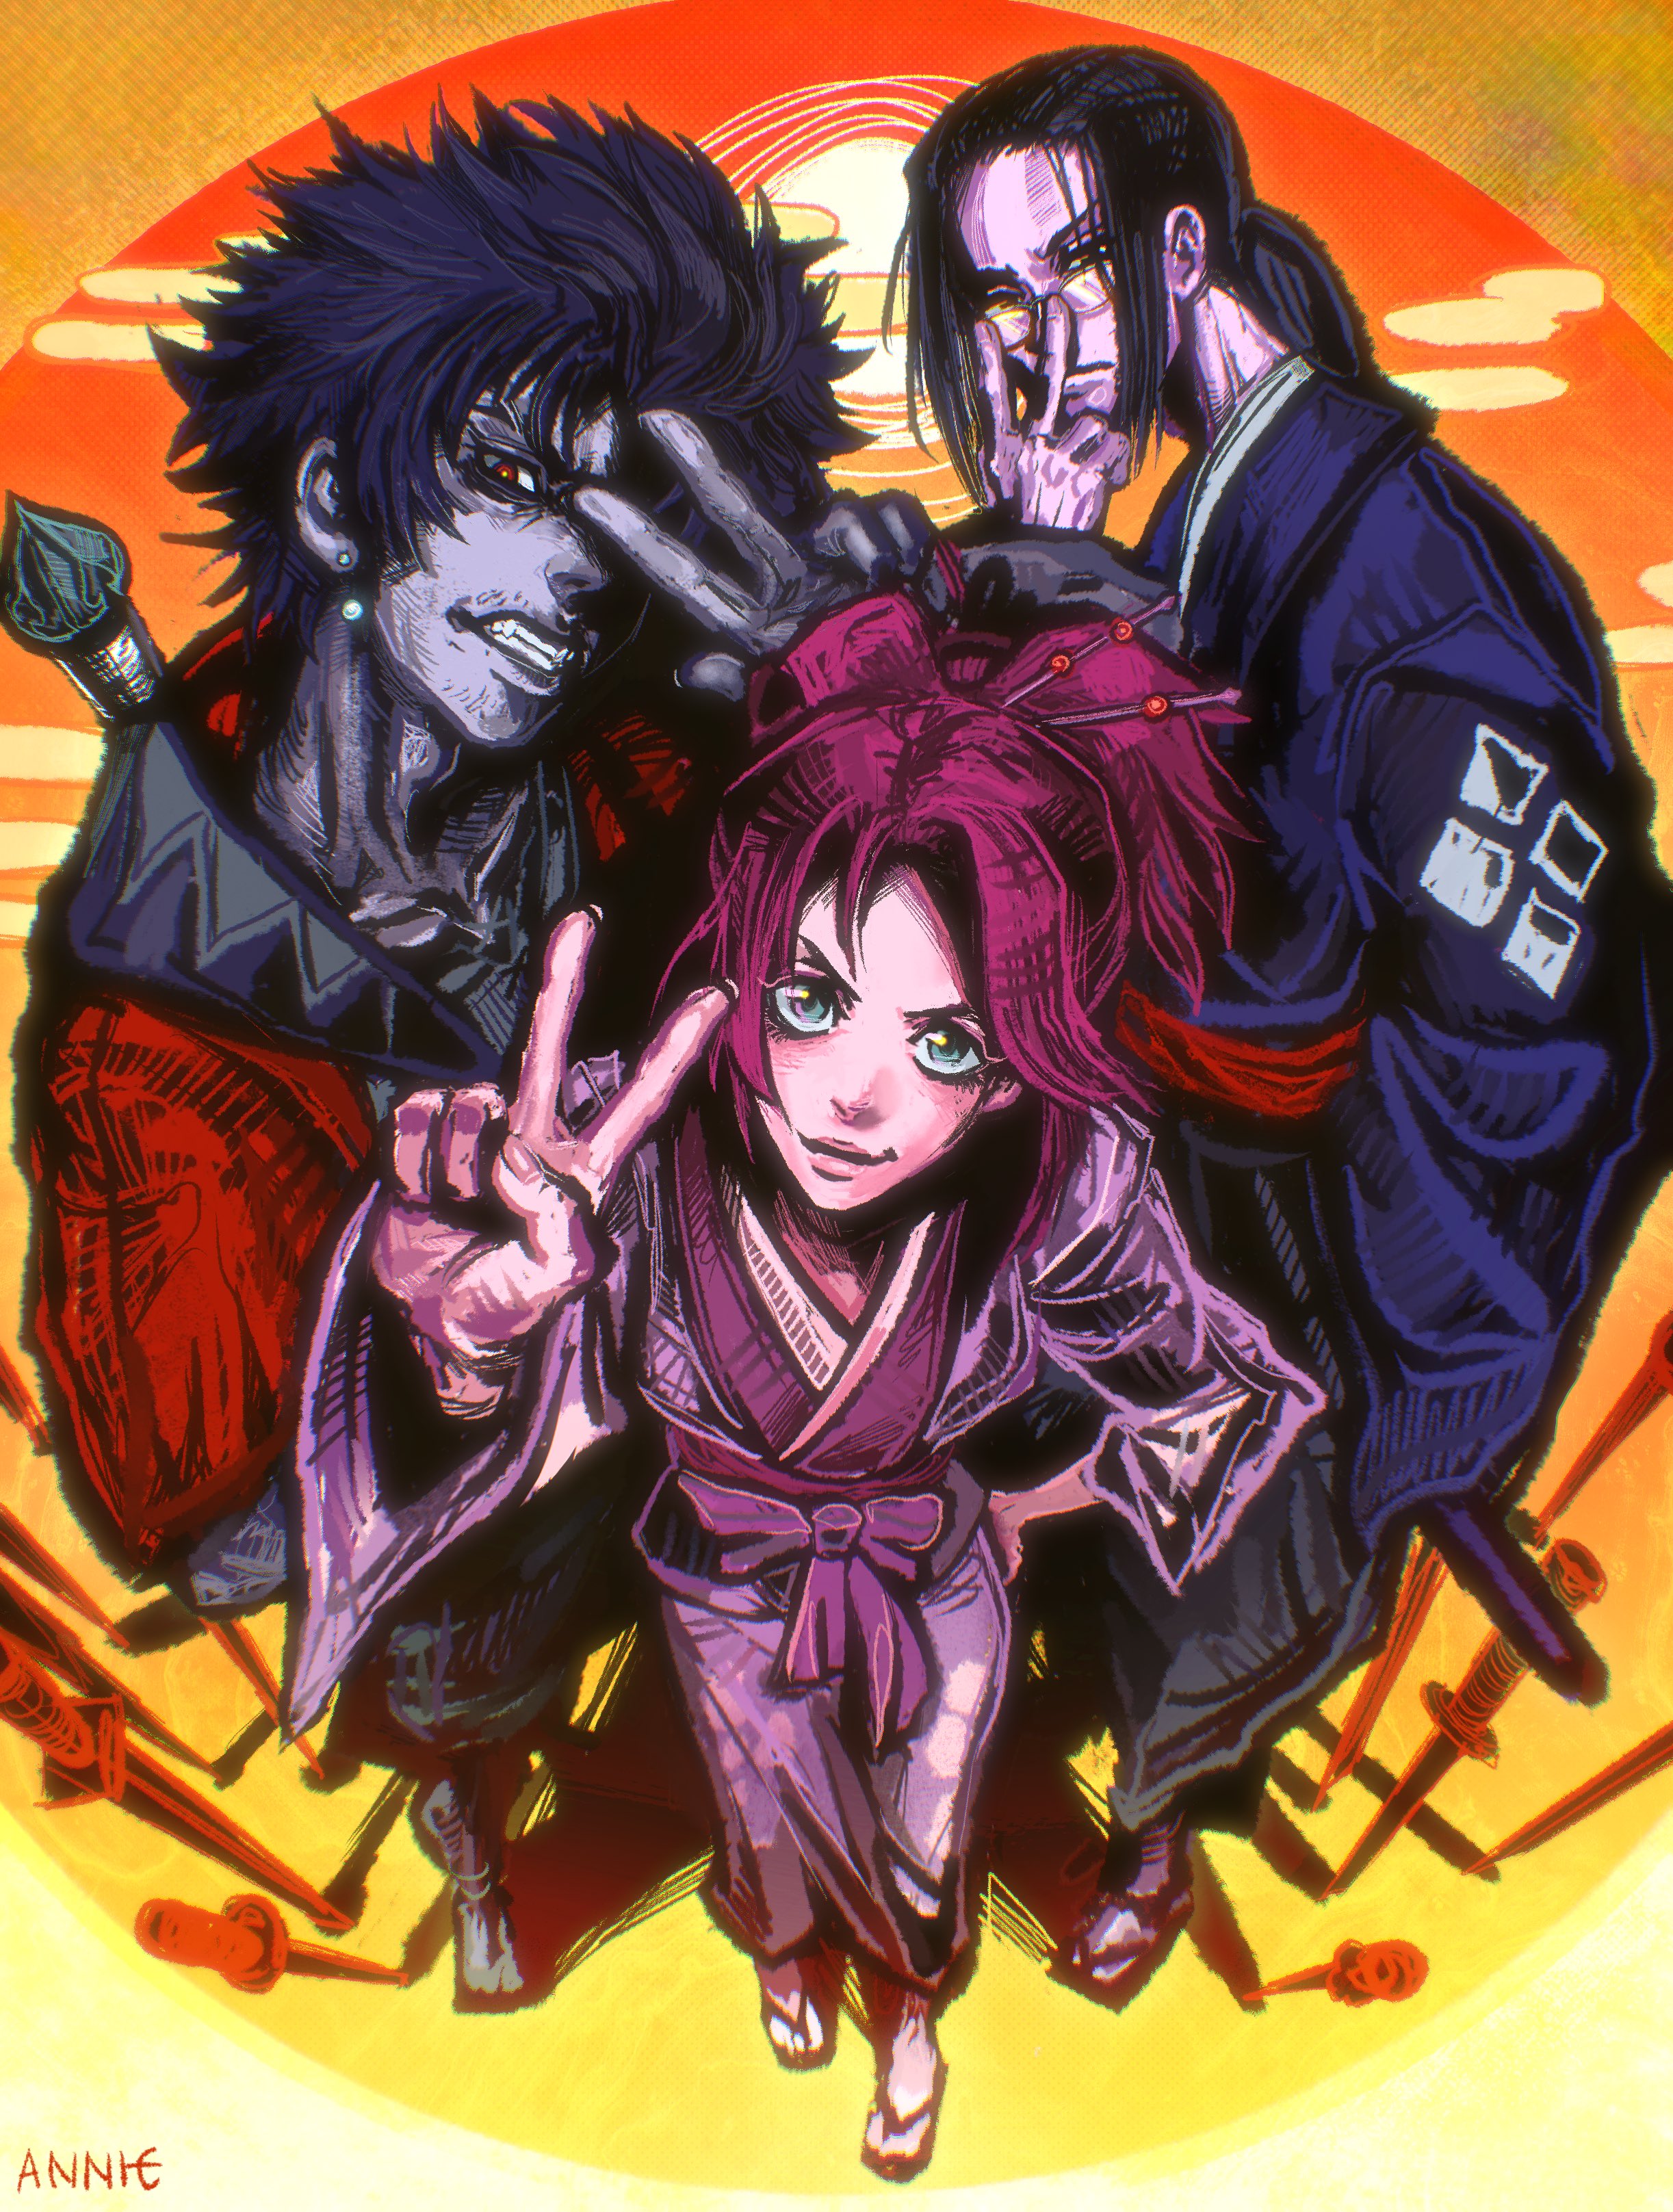 Anime 2445x3233 artwork fantasy art Samurai Champloo smiling digital art peace sign looking at viewer glasses one eye obstructed kimono signature anime boys anime girls closed mouth earring portrait display Mugen (Samurai Champloo) Jin (Samurai Champloo) Annie (Artist) Fuu Kasumi